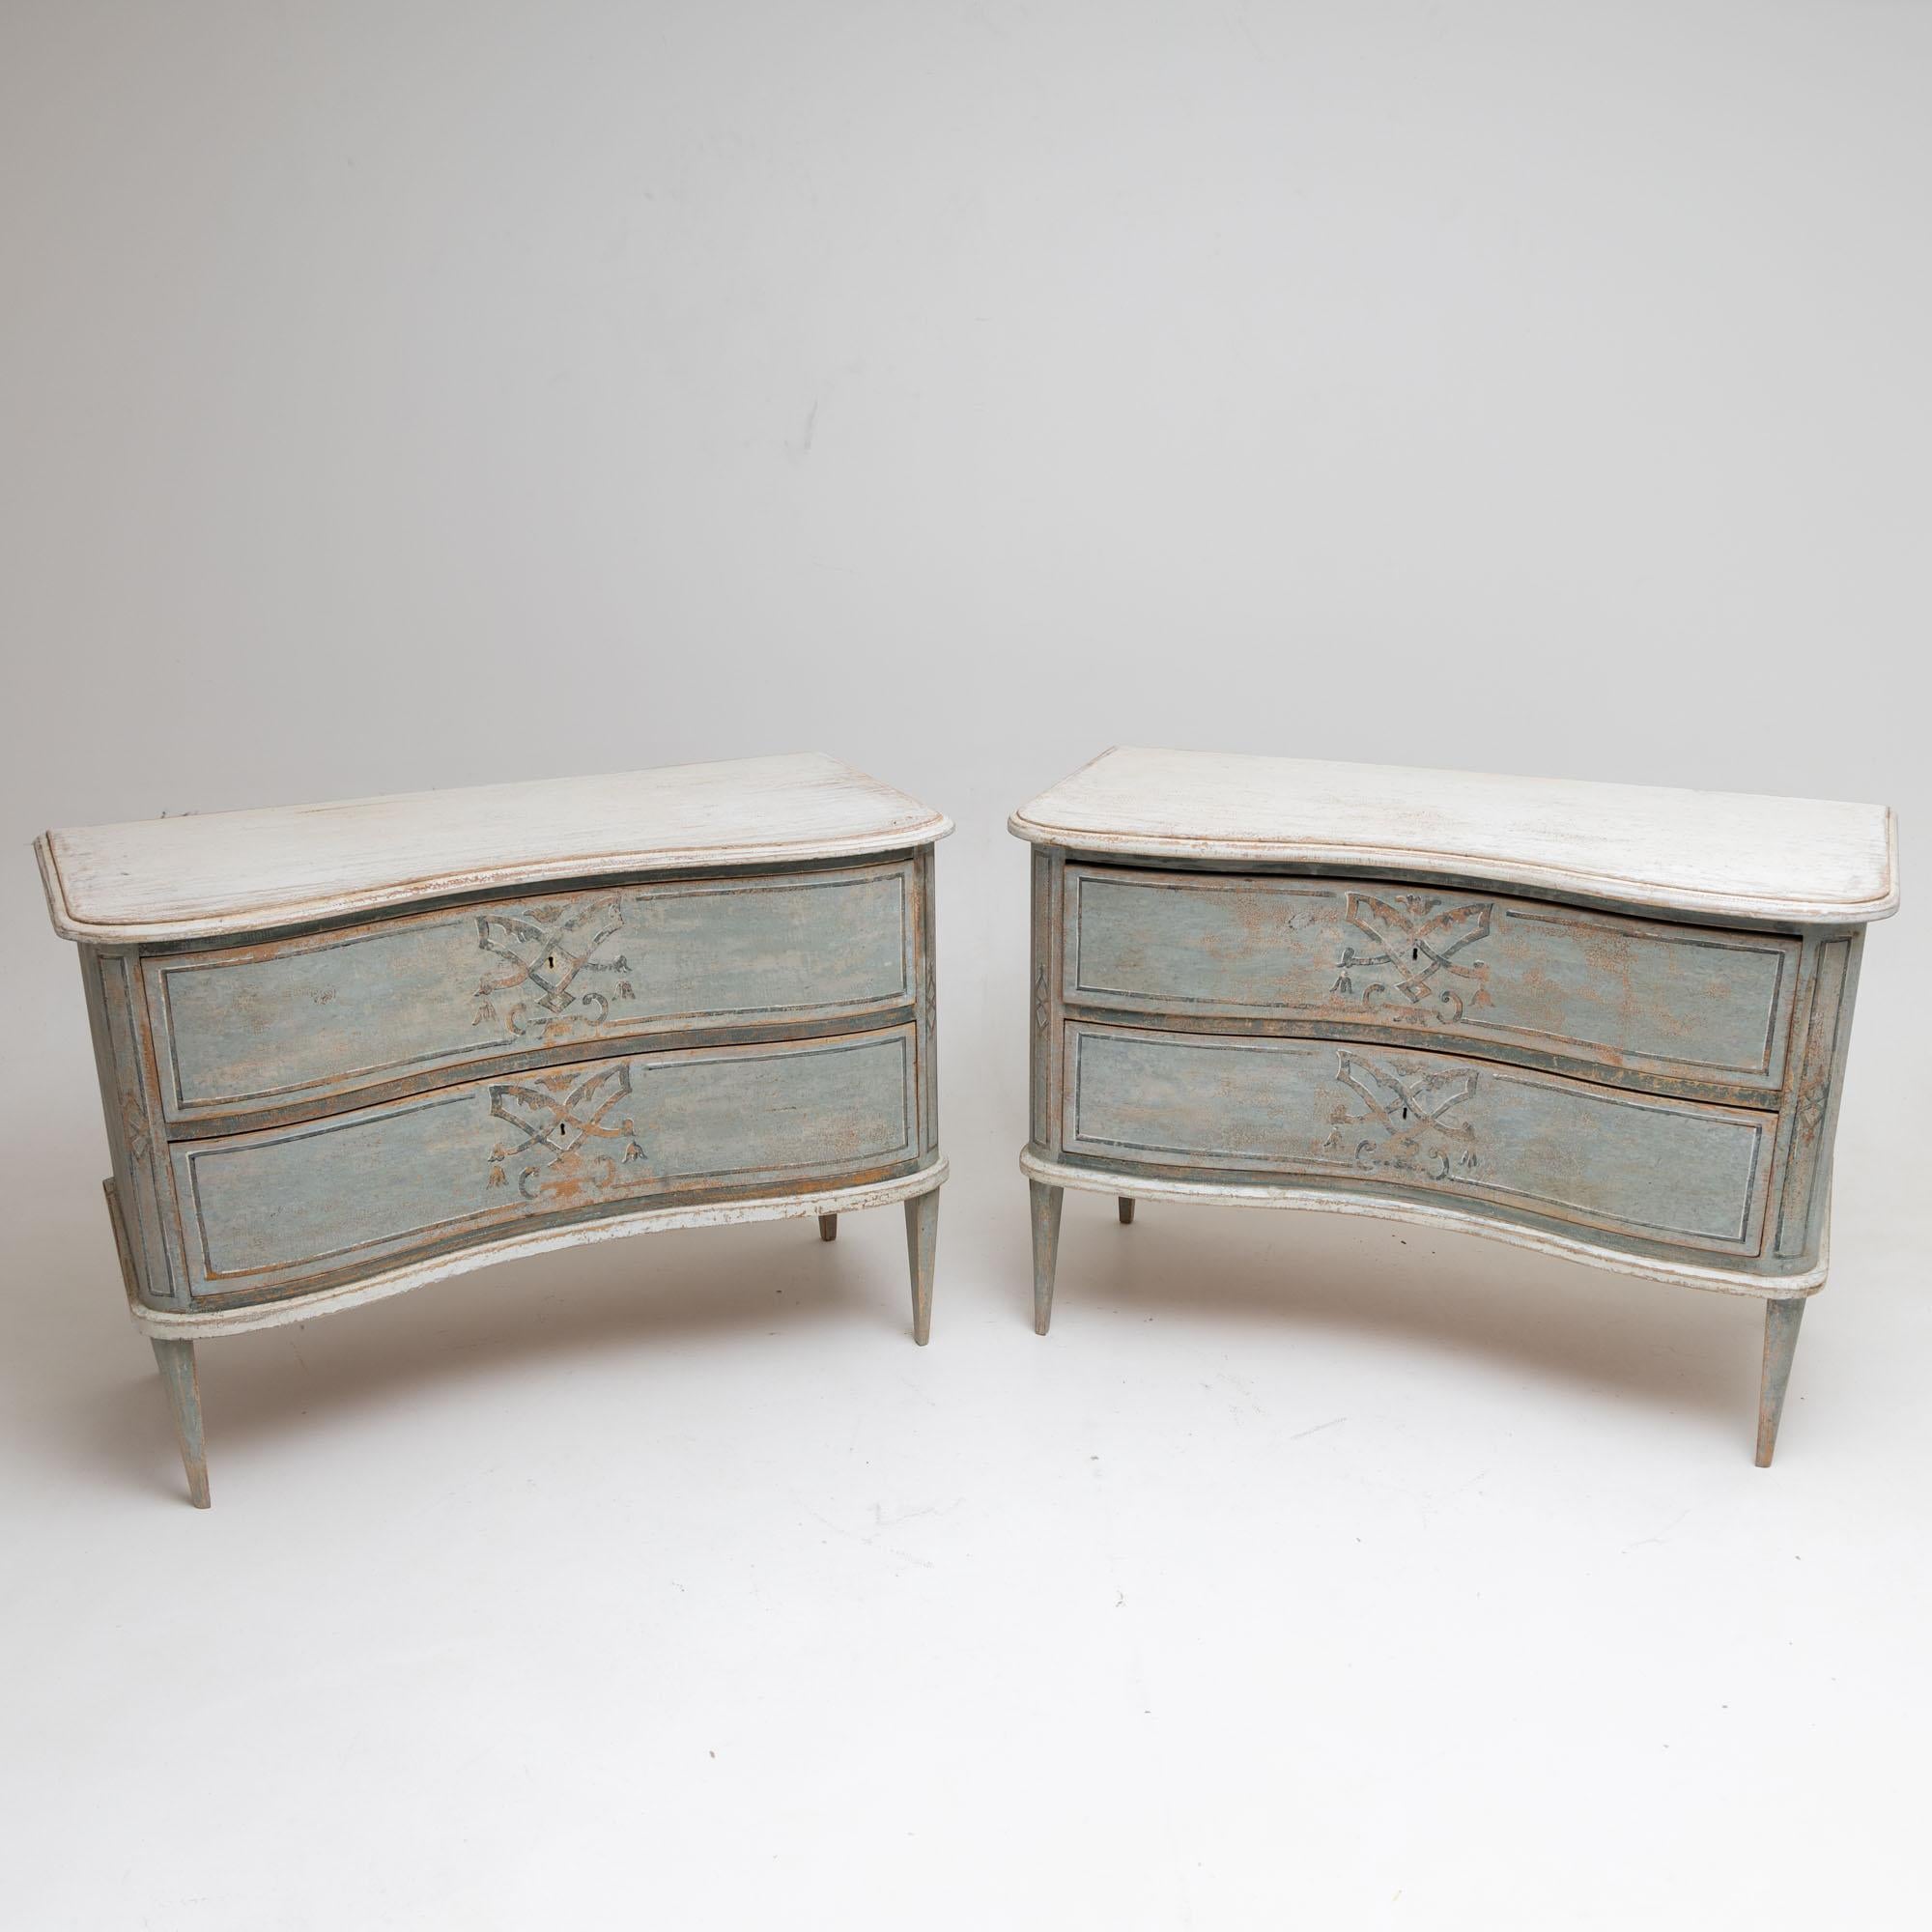 French Provincial Pair of Painted Chests of Drawers, Denmark, Late 19th Century